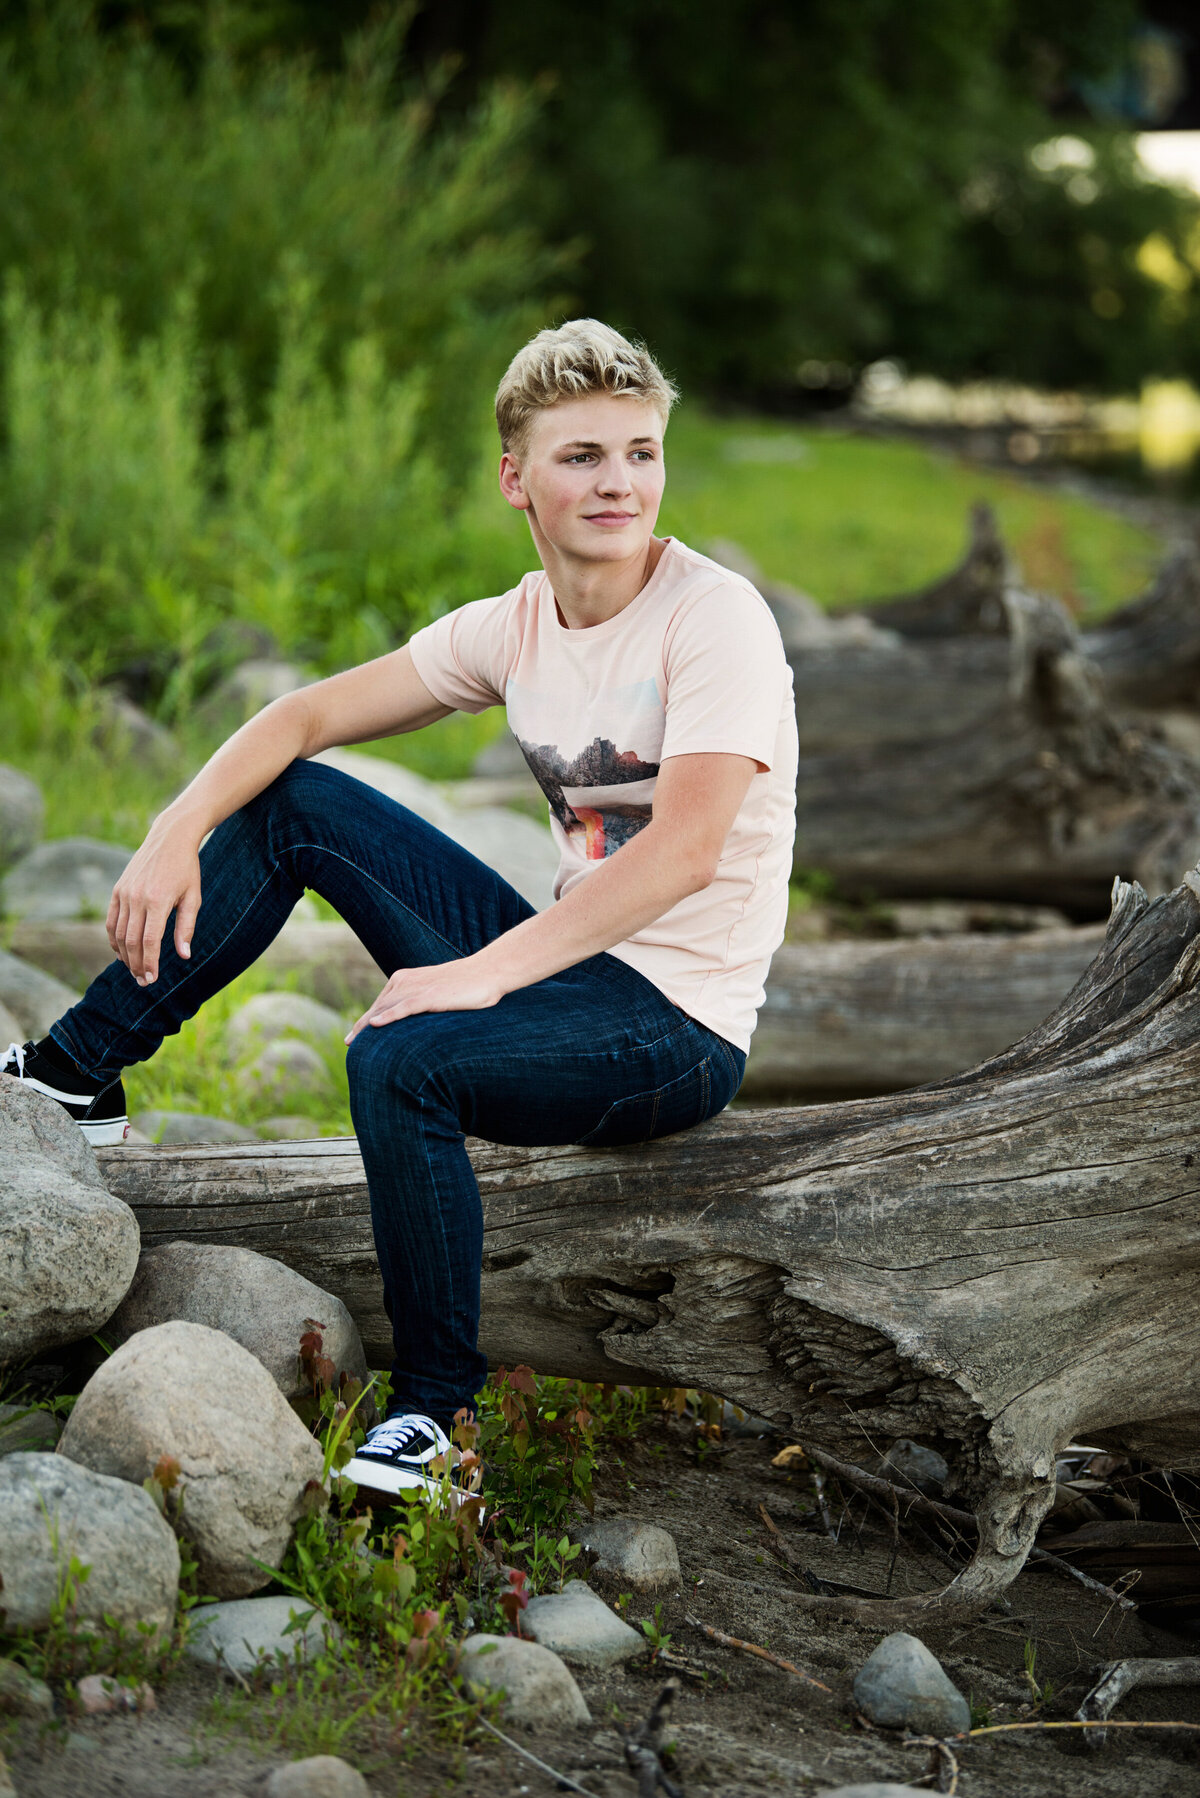 senior picture of boy sitting on driftwood in nature wearing jeans and t-shirt